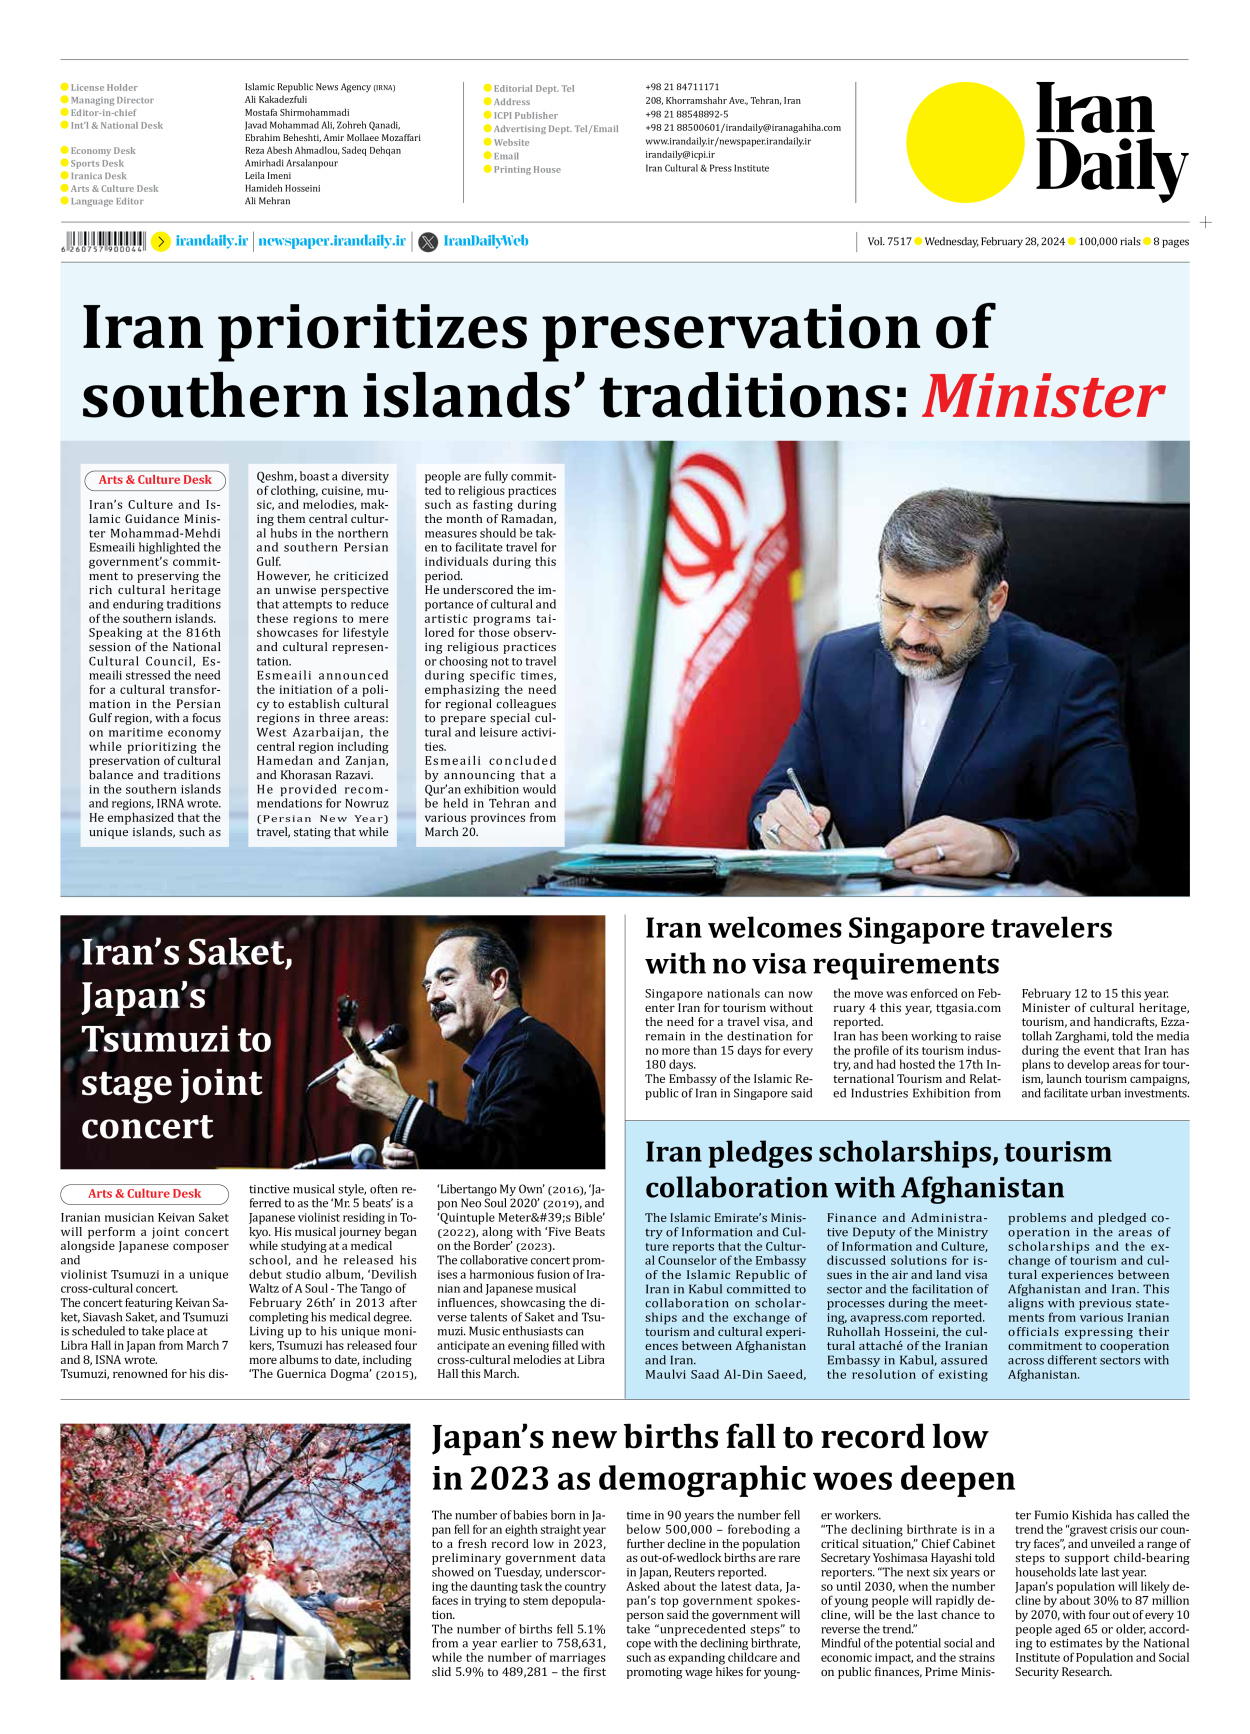 Iran Daily - Number Seven Thousand Five Hundred and Seventeen - 28 February 2024 - Page 8